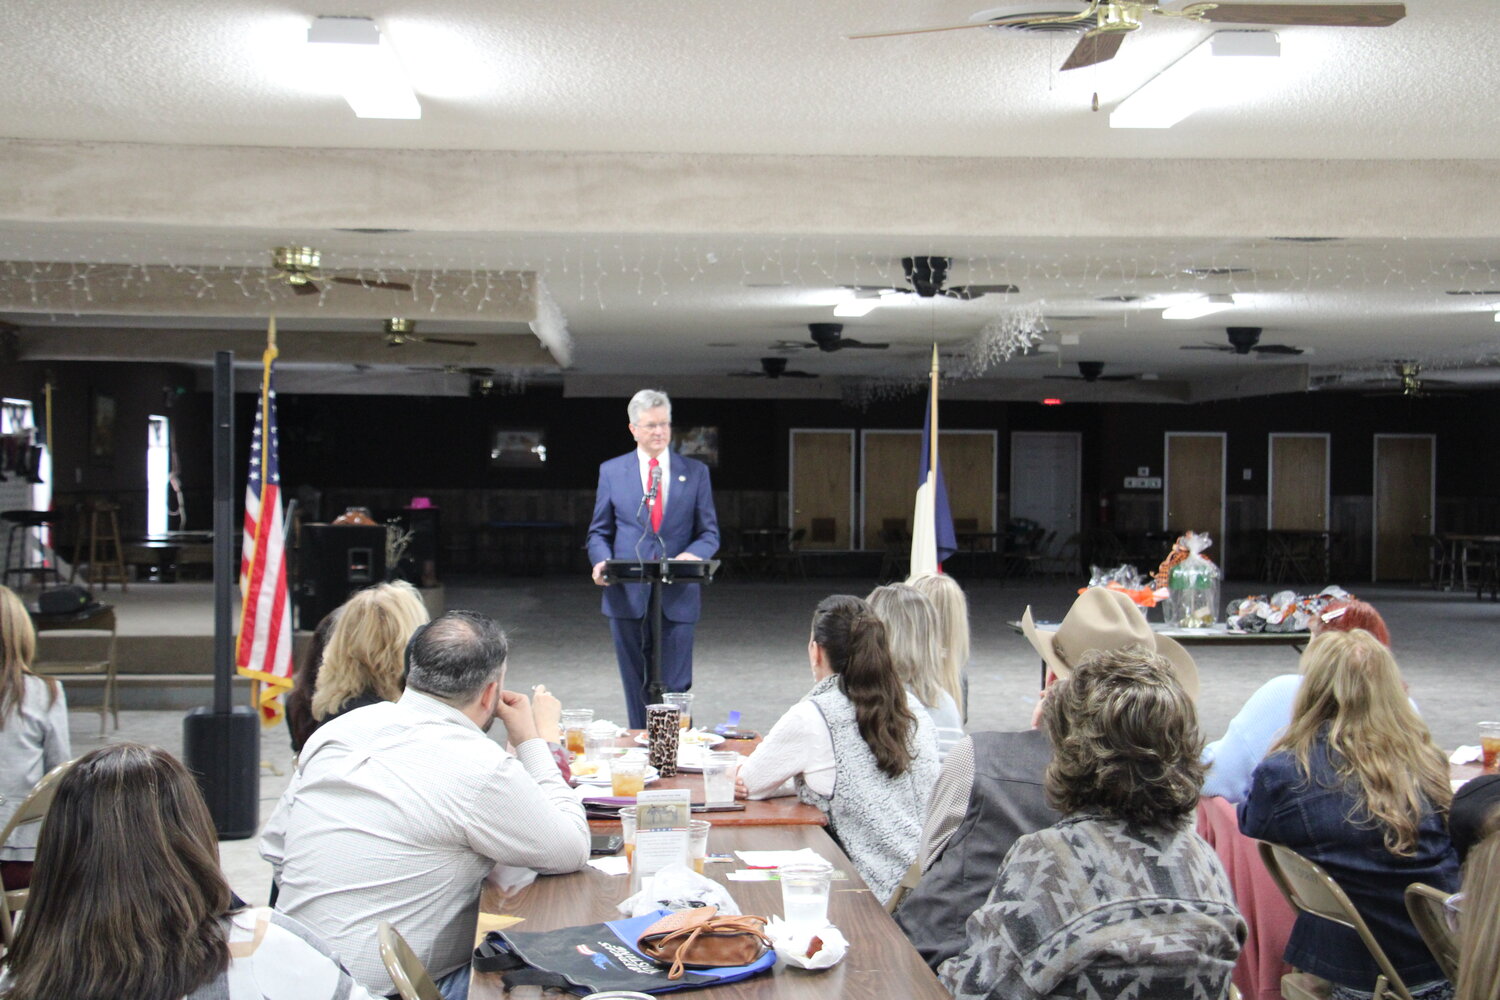 State Rep. Glenn Rogers, who represents Parker, Palo Pinto and Stephens counties, spoke at the Springtown Area Chamber of Commerce luncheon Jan. 25. He talked about the legislative sessions in 2023, what was accomplished and his views on certain issues.